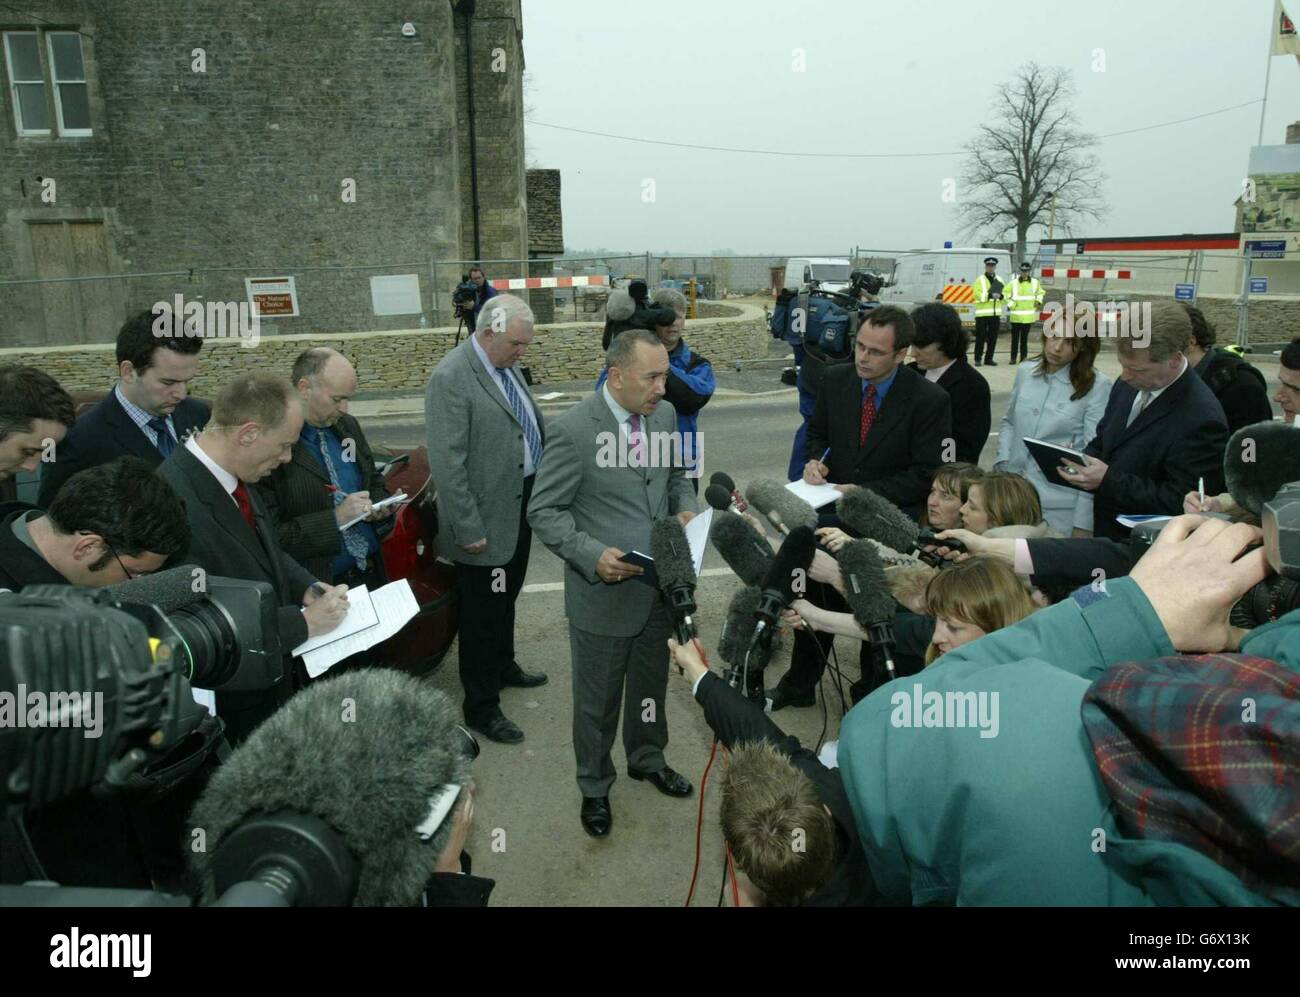 Detective Chief Superintendent Paul Howlet announces to the waiting media that they have found the body of missing girl Amanda Edwards, at the building site behind him, in Malmesbury, Wiltshire. Stock Photo